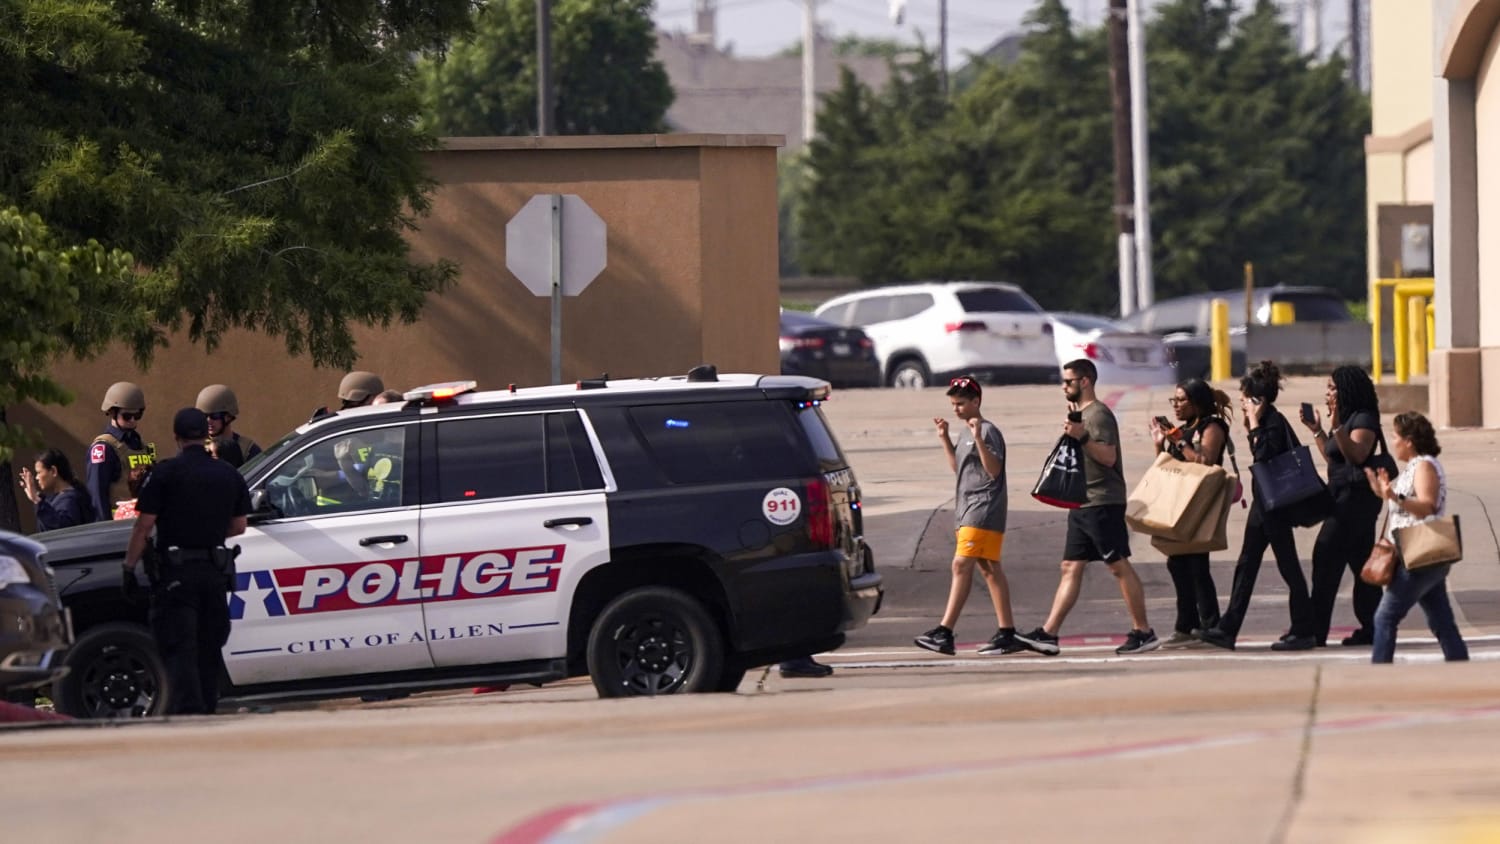 Graphic videos spread on Twitter following Texas shooting and SUV incident